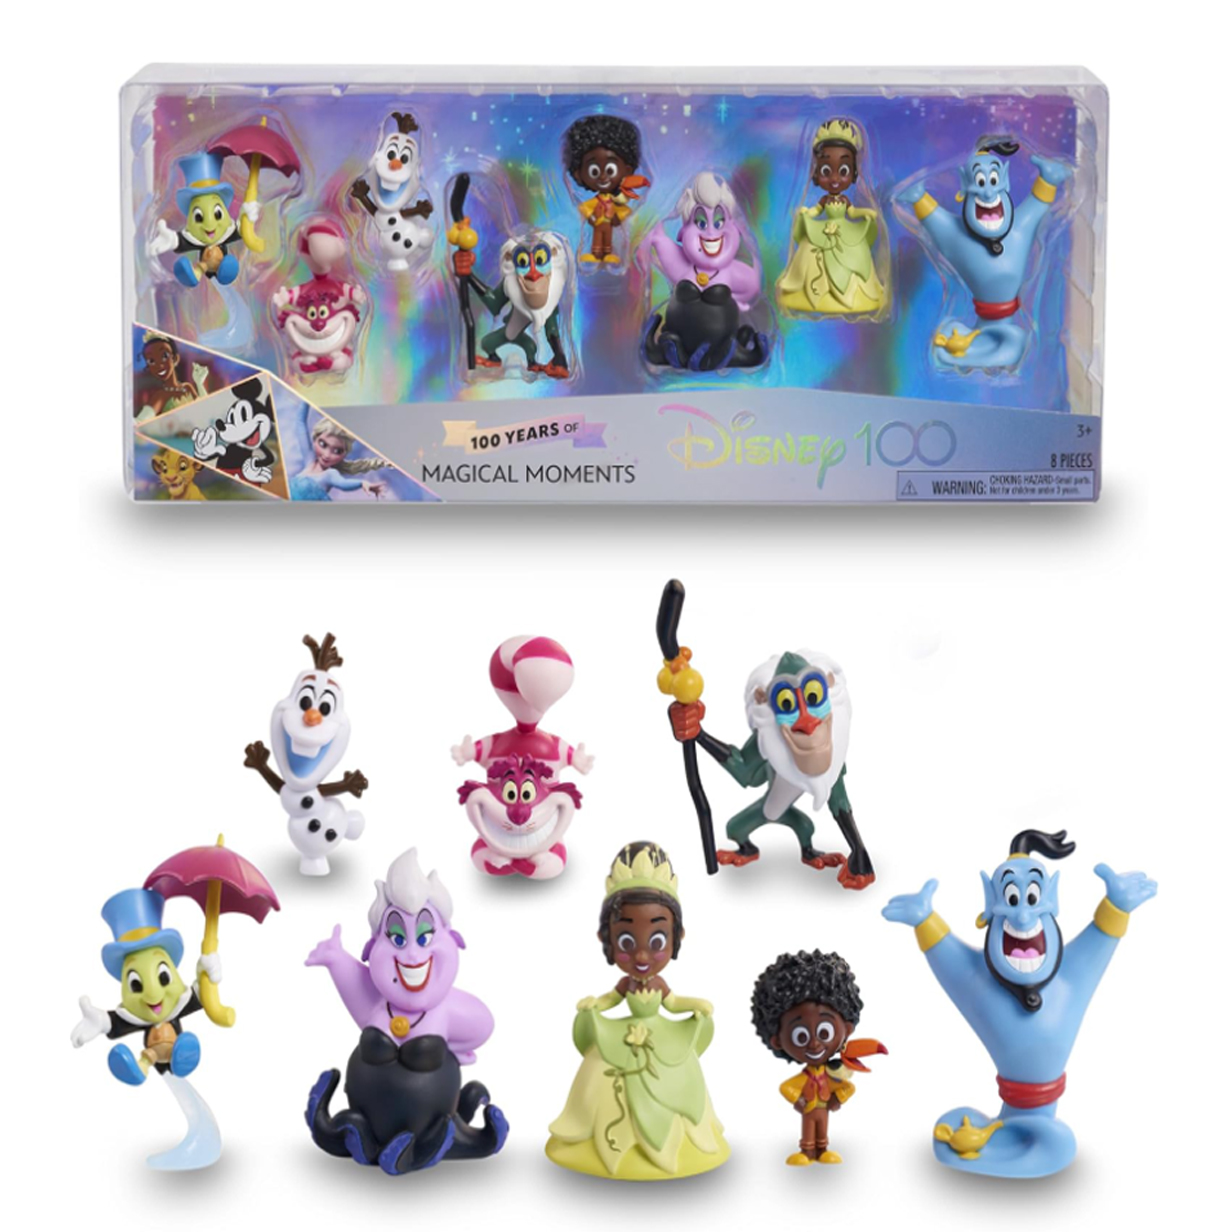 disney 100 pack 8 figuras coleccionables (famosa - ded16000).